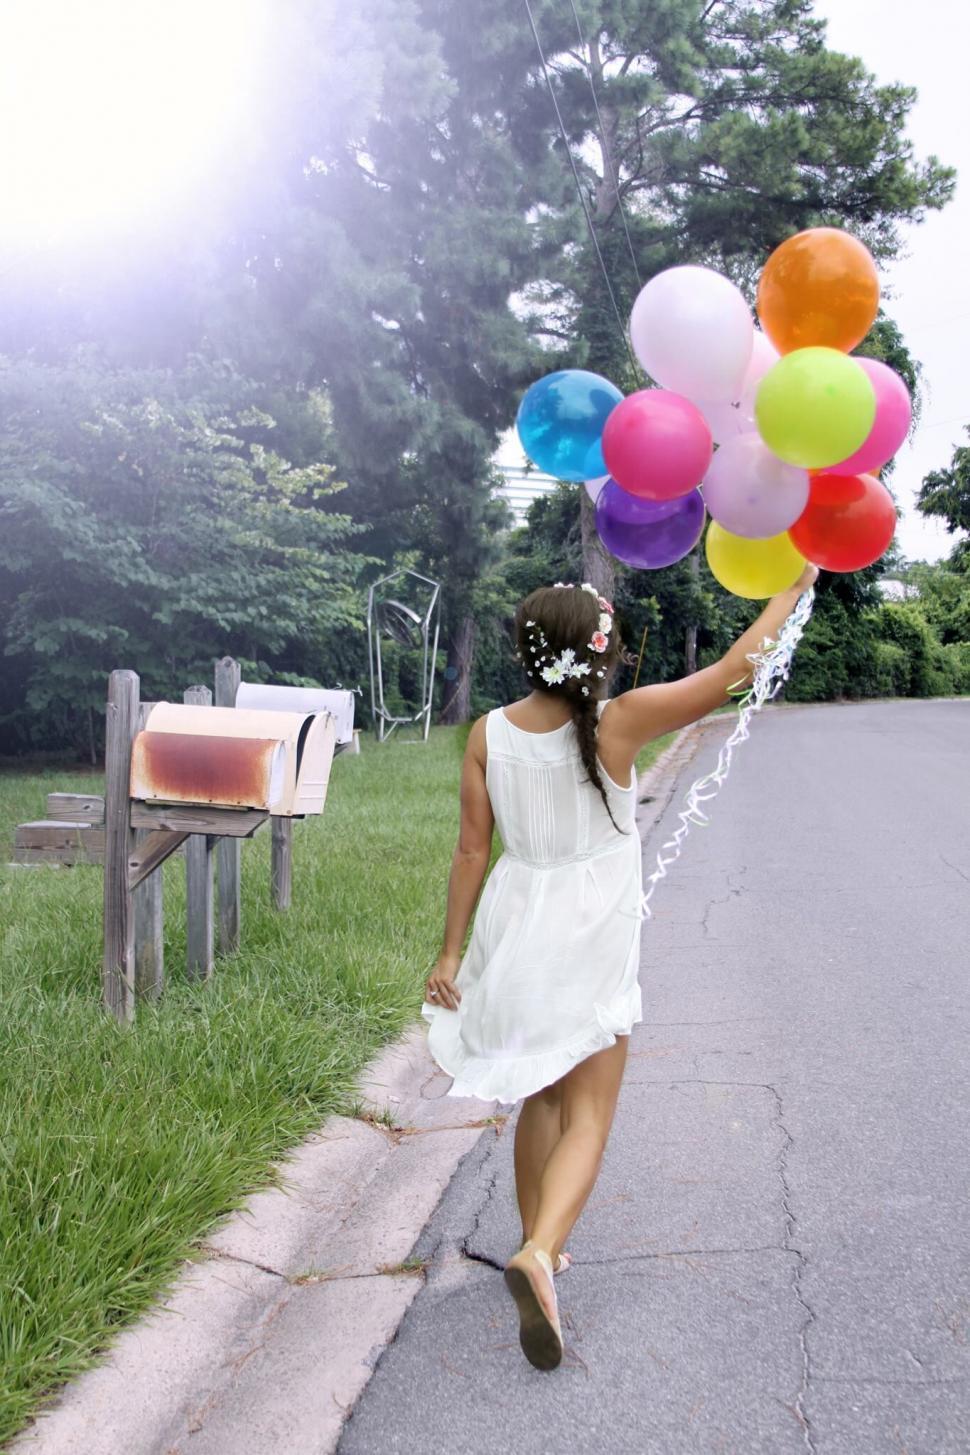 Free Image of Girl with balloons walking in a park 